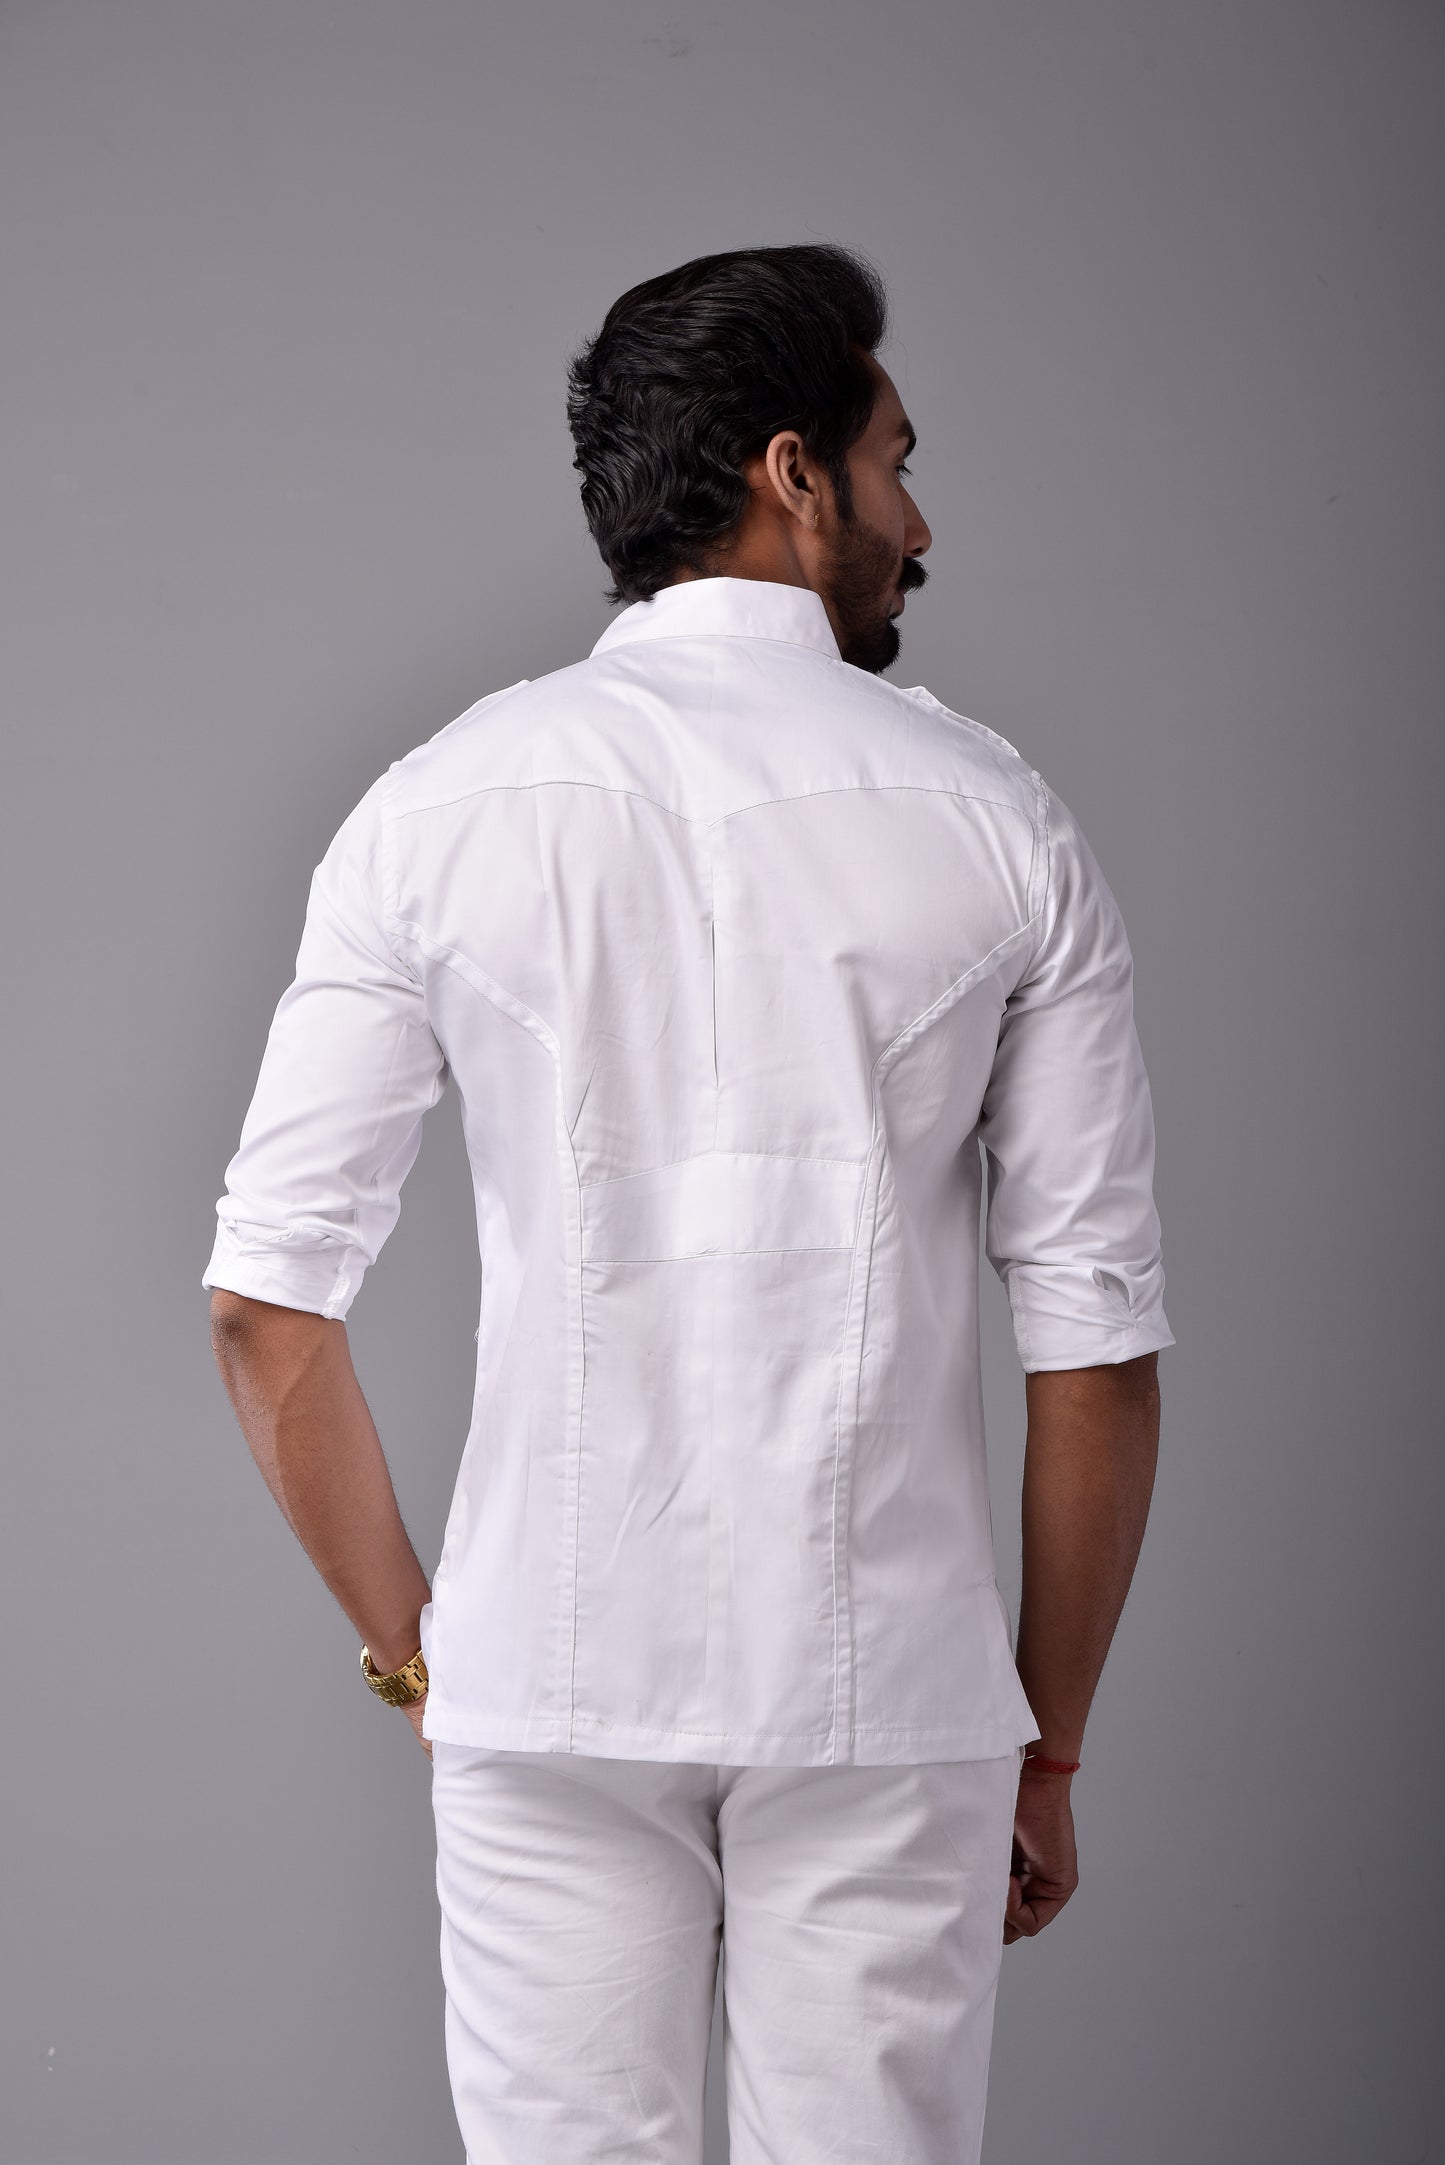 Comfy White Hunting Style Shirt